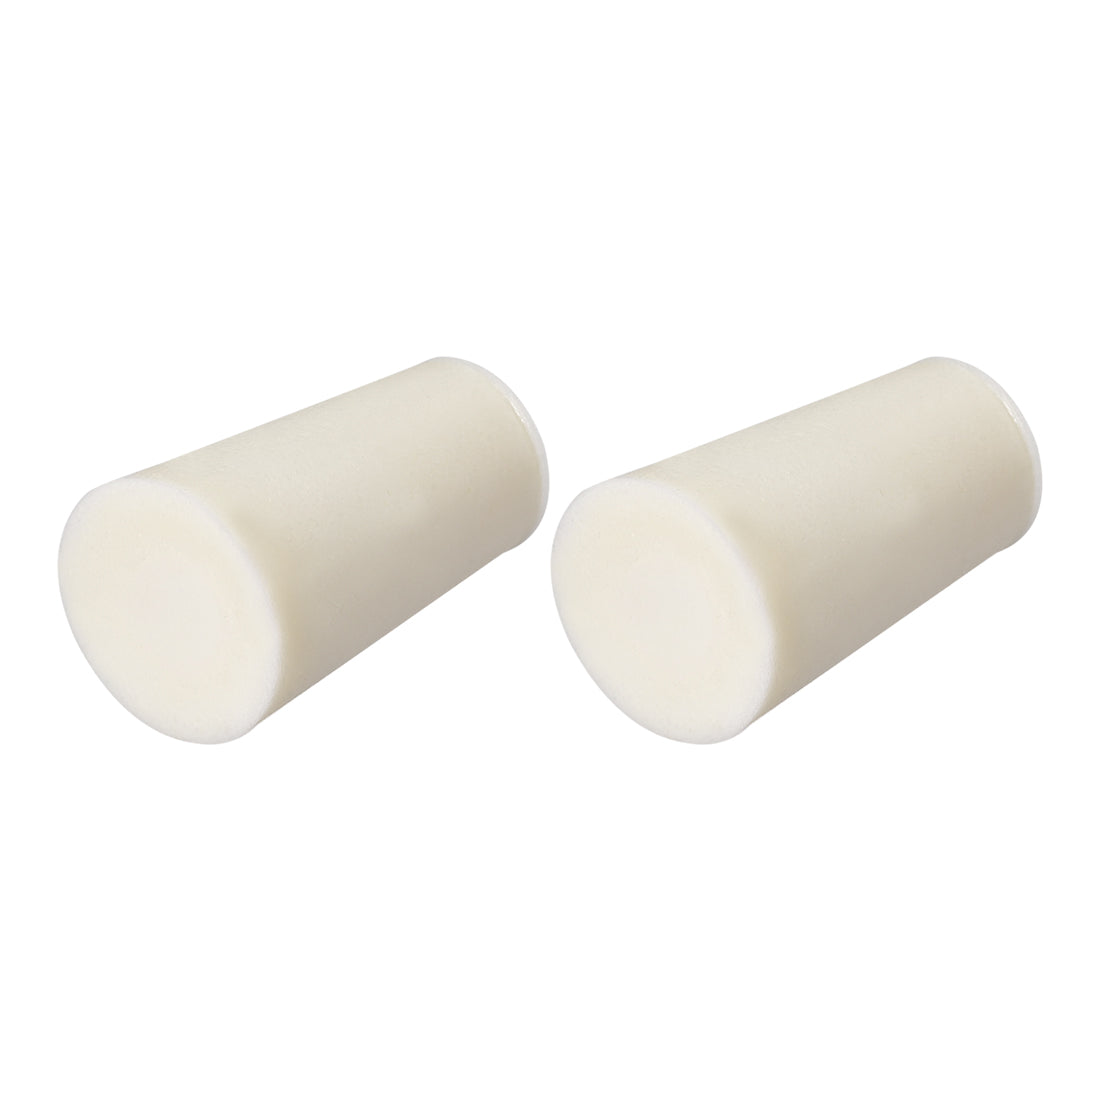 uxcell Uxcell 15-19mm Beige Drilled Silicone Stopper Plugs for Flask Test Tube Stopper 2pcs